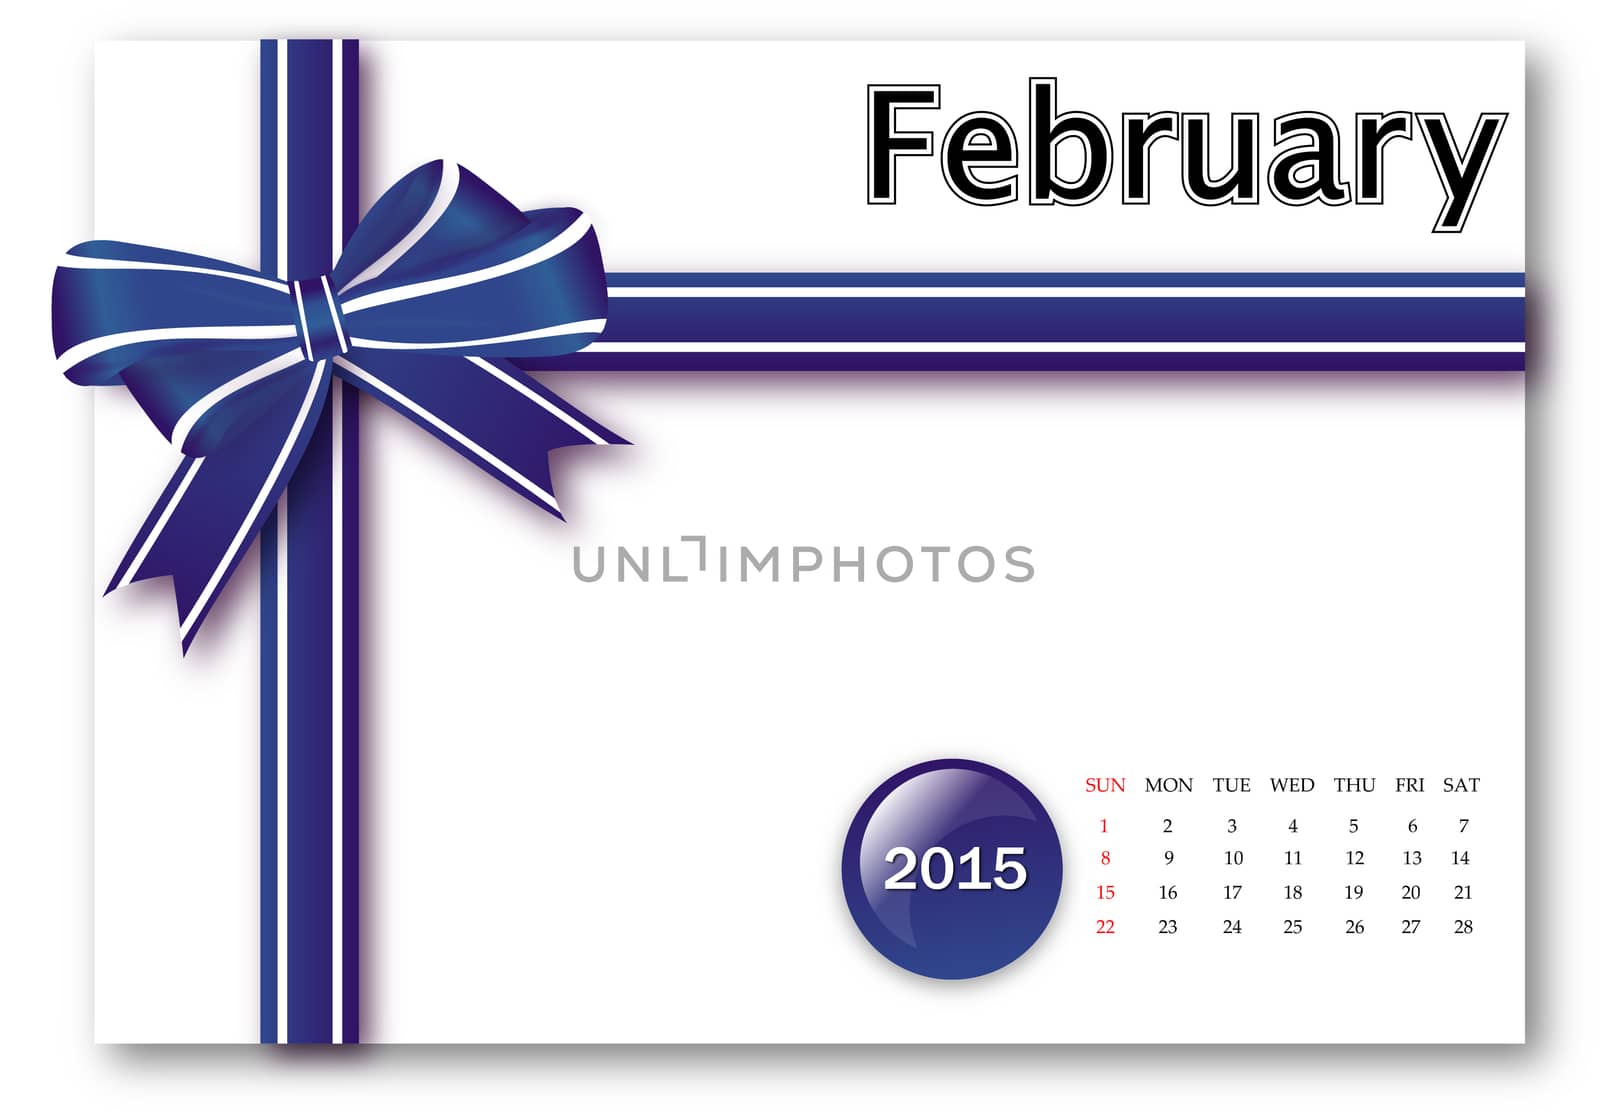 February 2015 - Calendar series with gift ribbon design